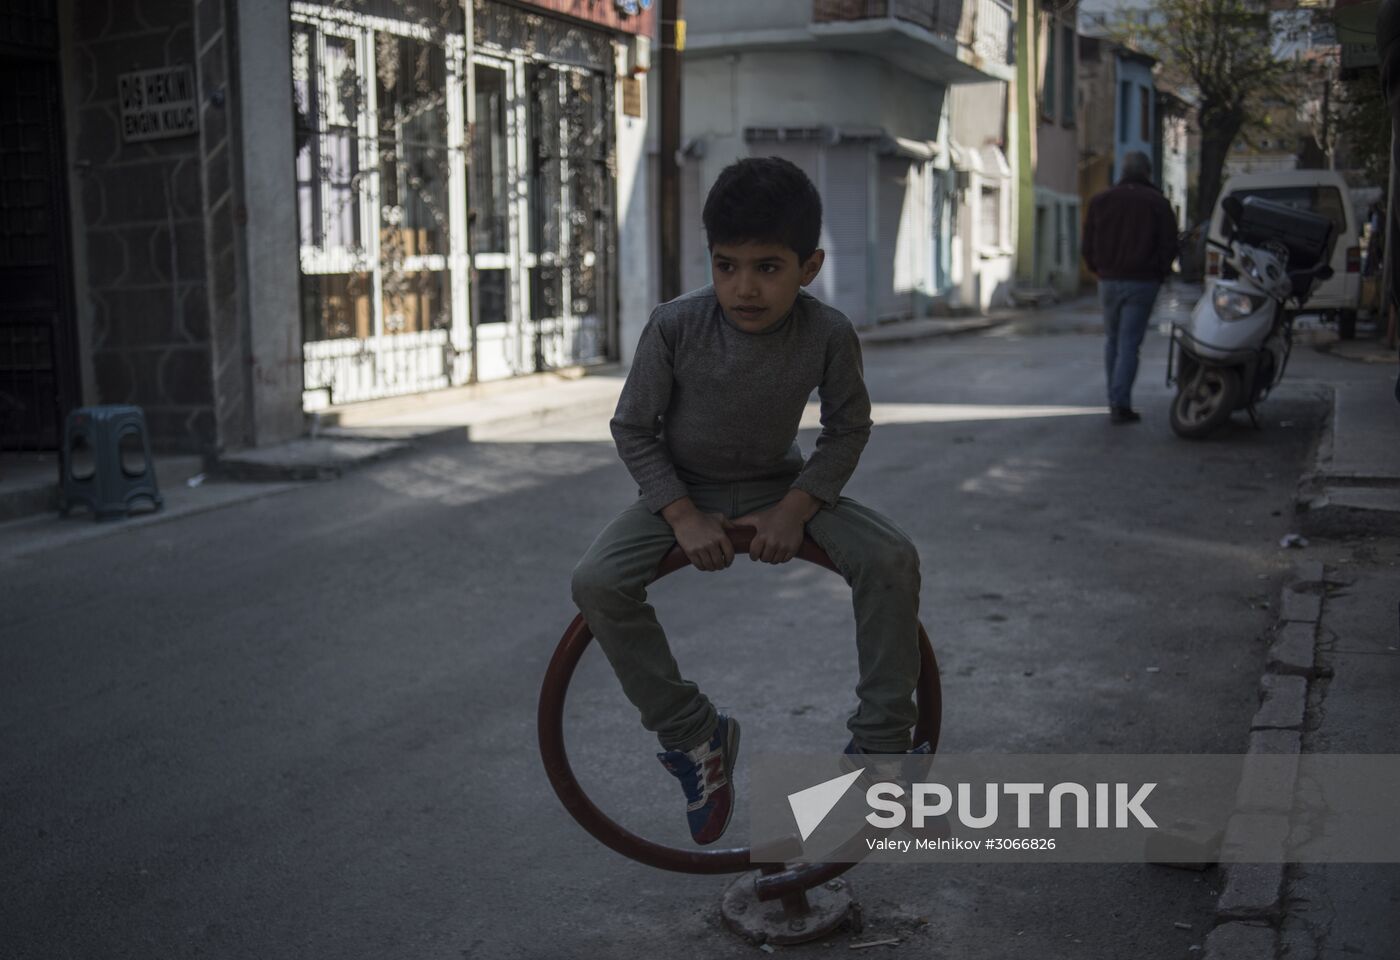 Syrian refugges in Turkey's Izmir Province